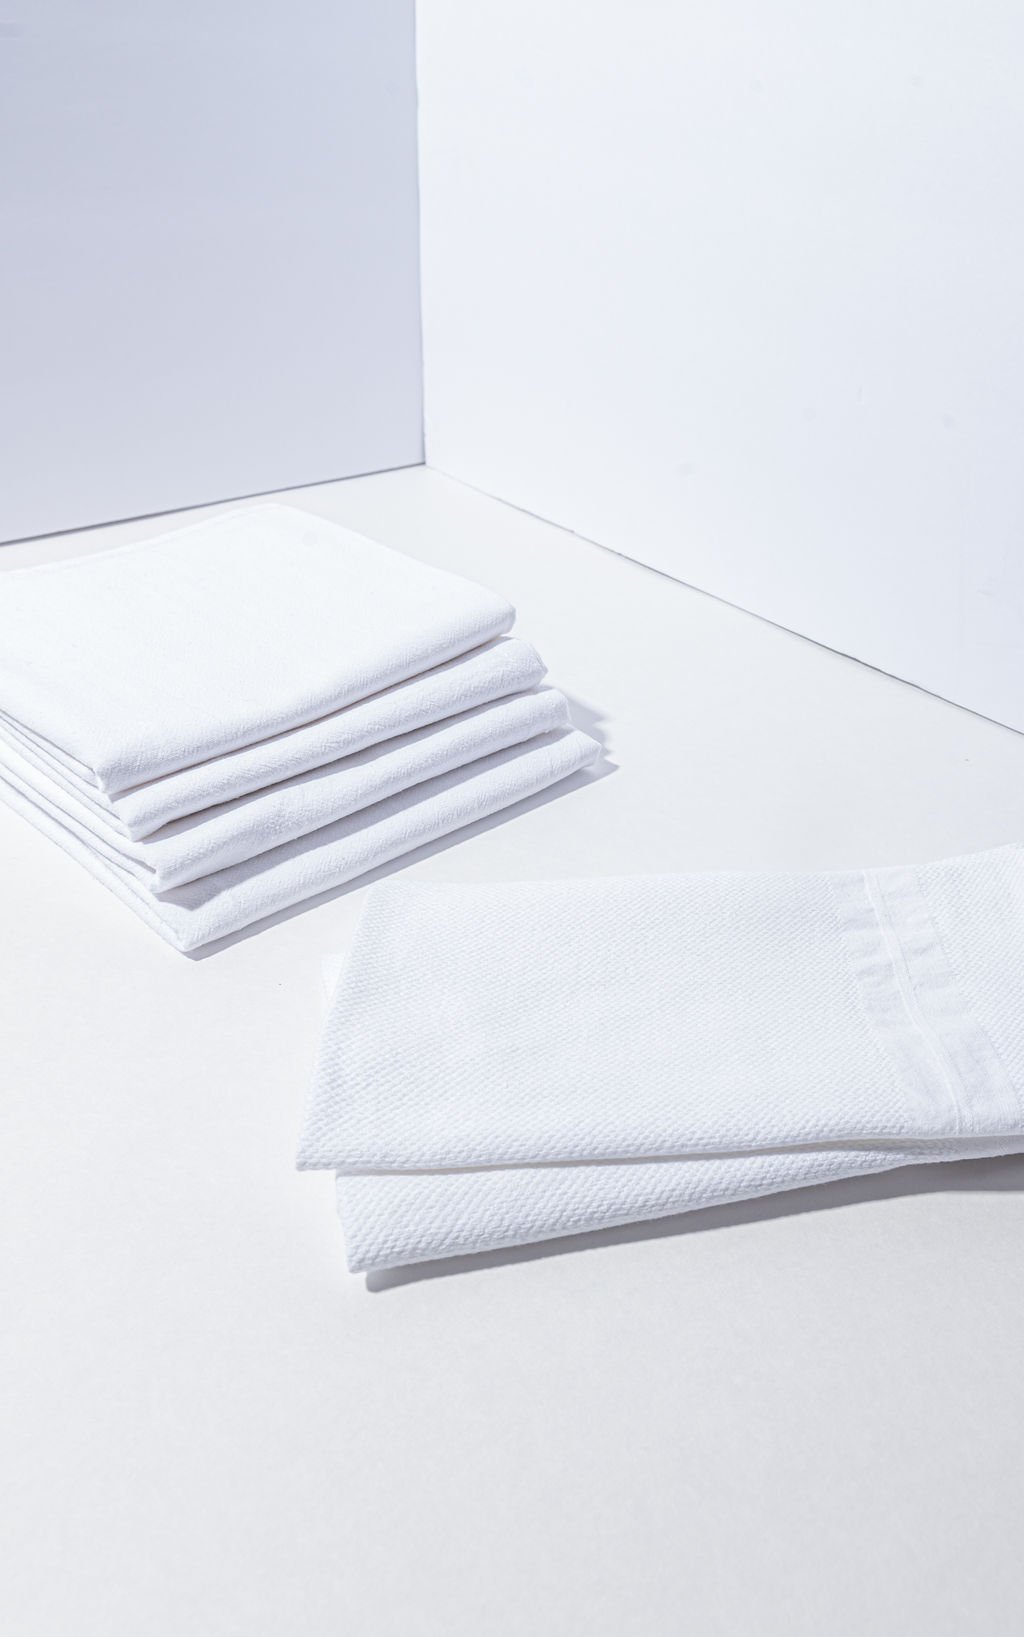 White napkins by ALT brand arranged in a stack on a white surface captured by Portland branding photographer.